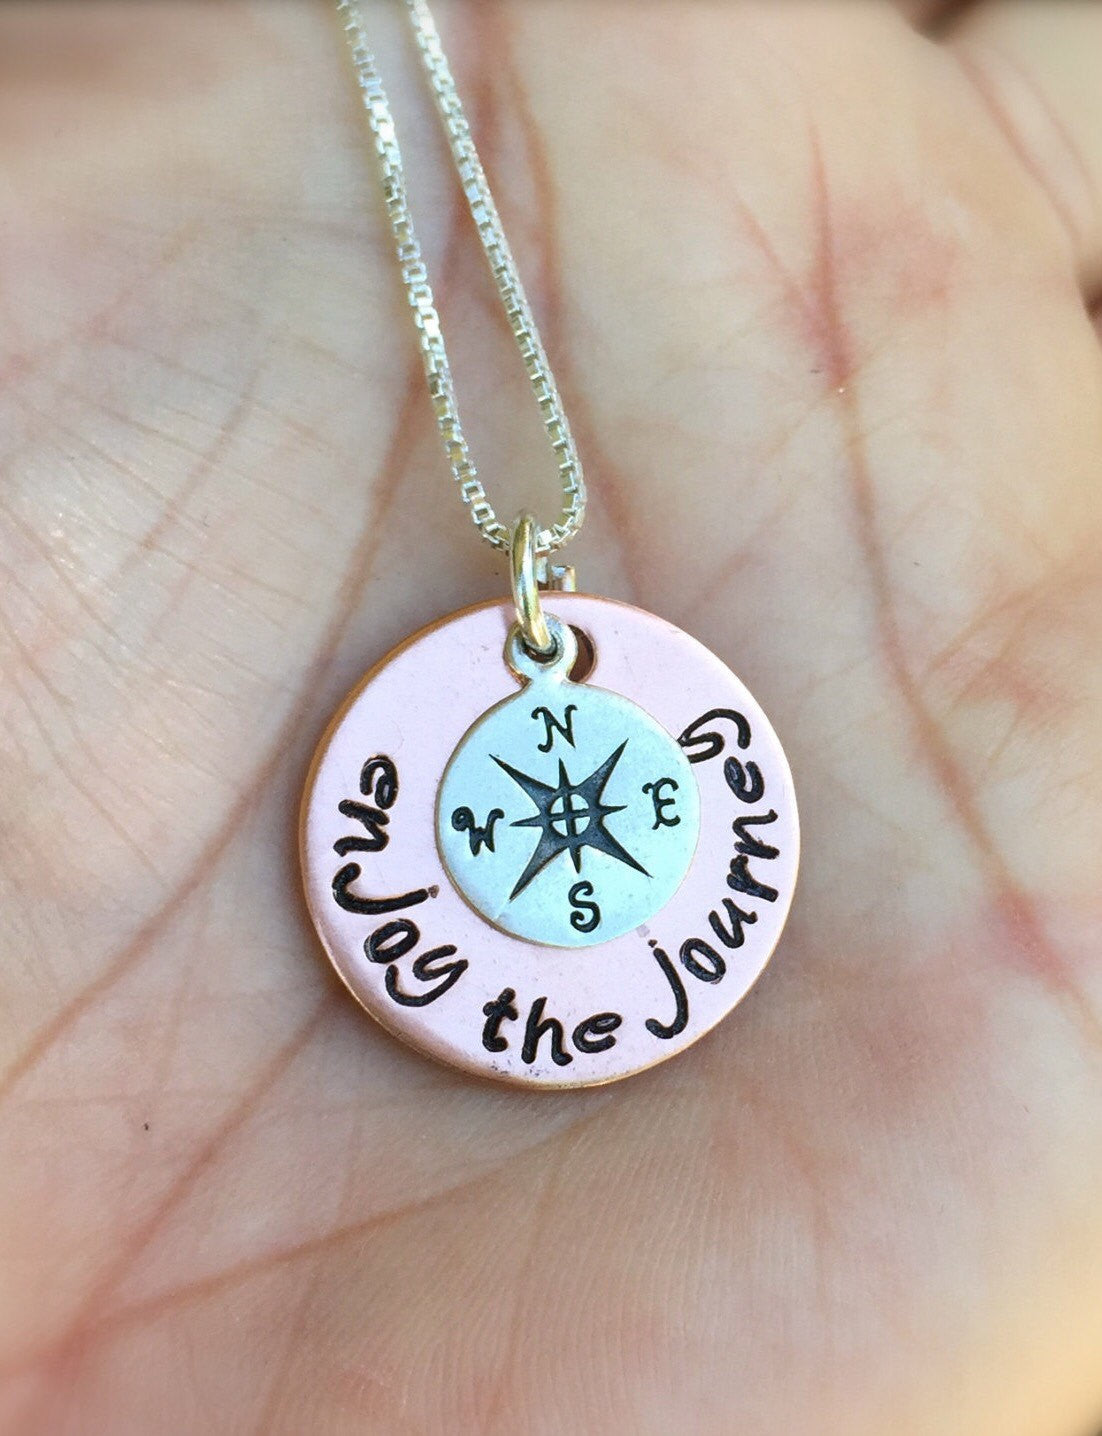 Graduation Gift, Follow Your Dreams, Enjoy the Journey Necklace - Natashaaloha, jewelry, bracelets, necklace, keychains, fishing lures, gifts for men, charms, personalized, 